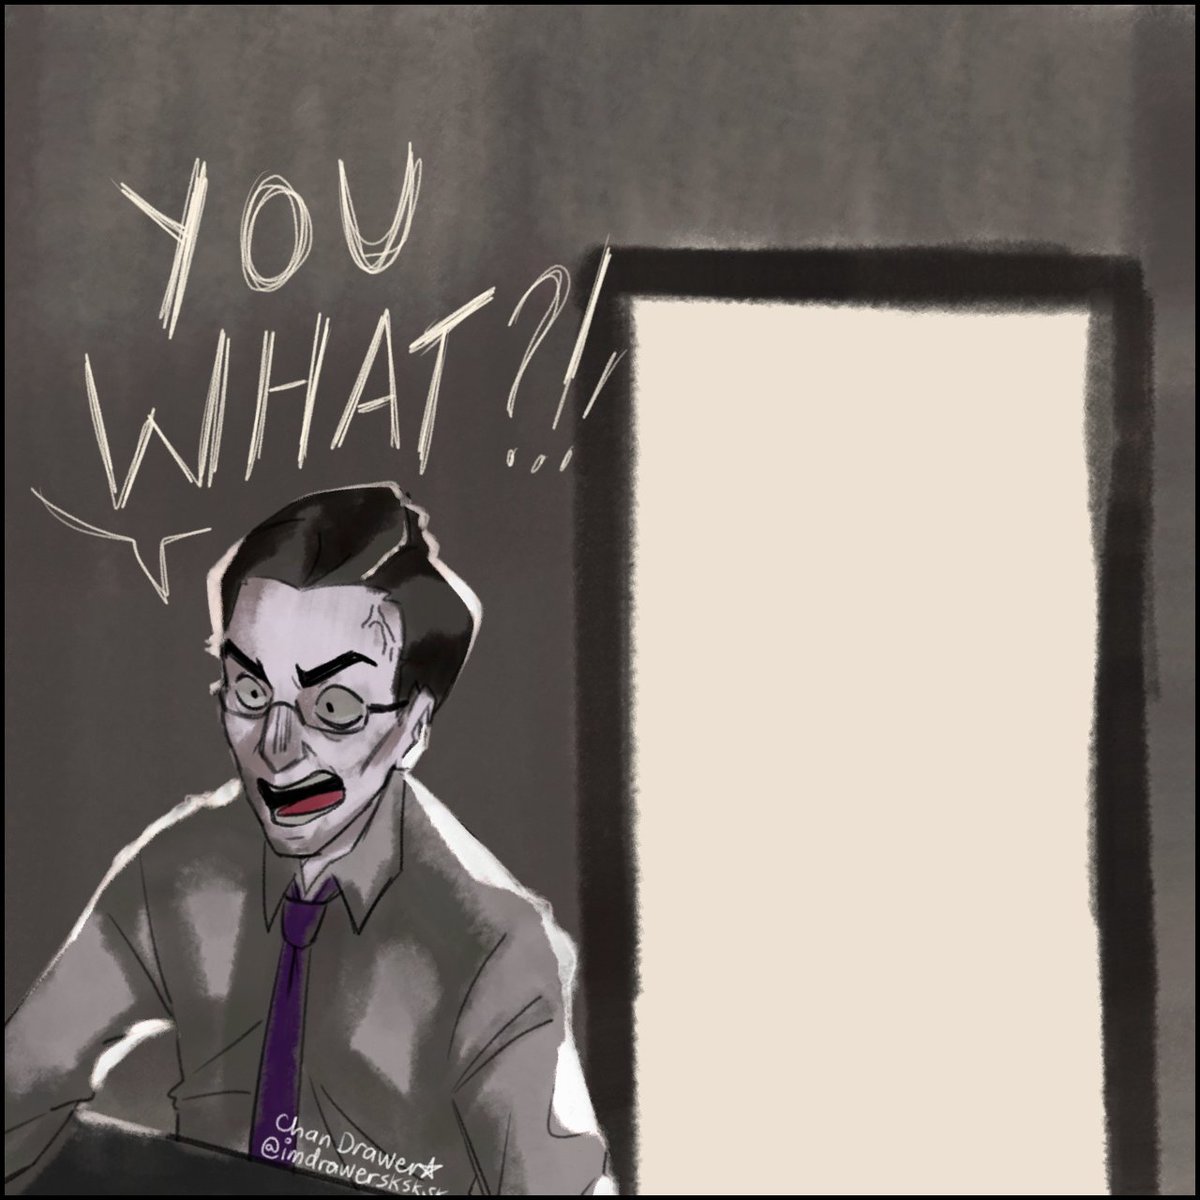 the moment he reaalized... #fnaf